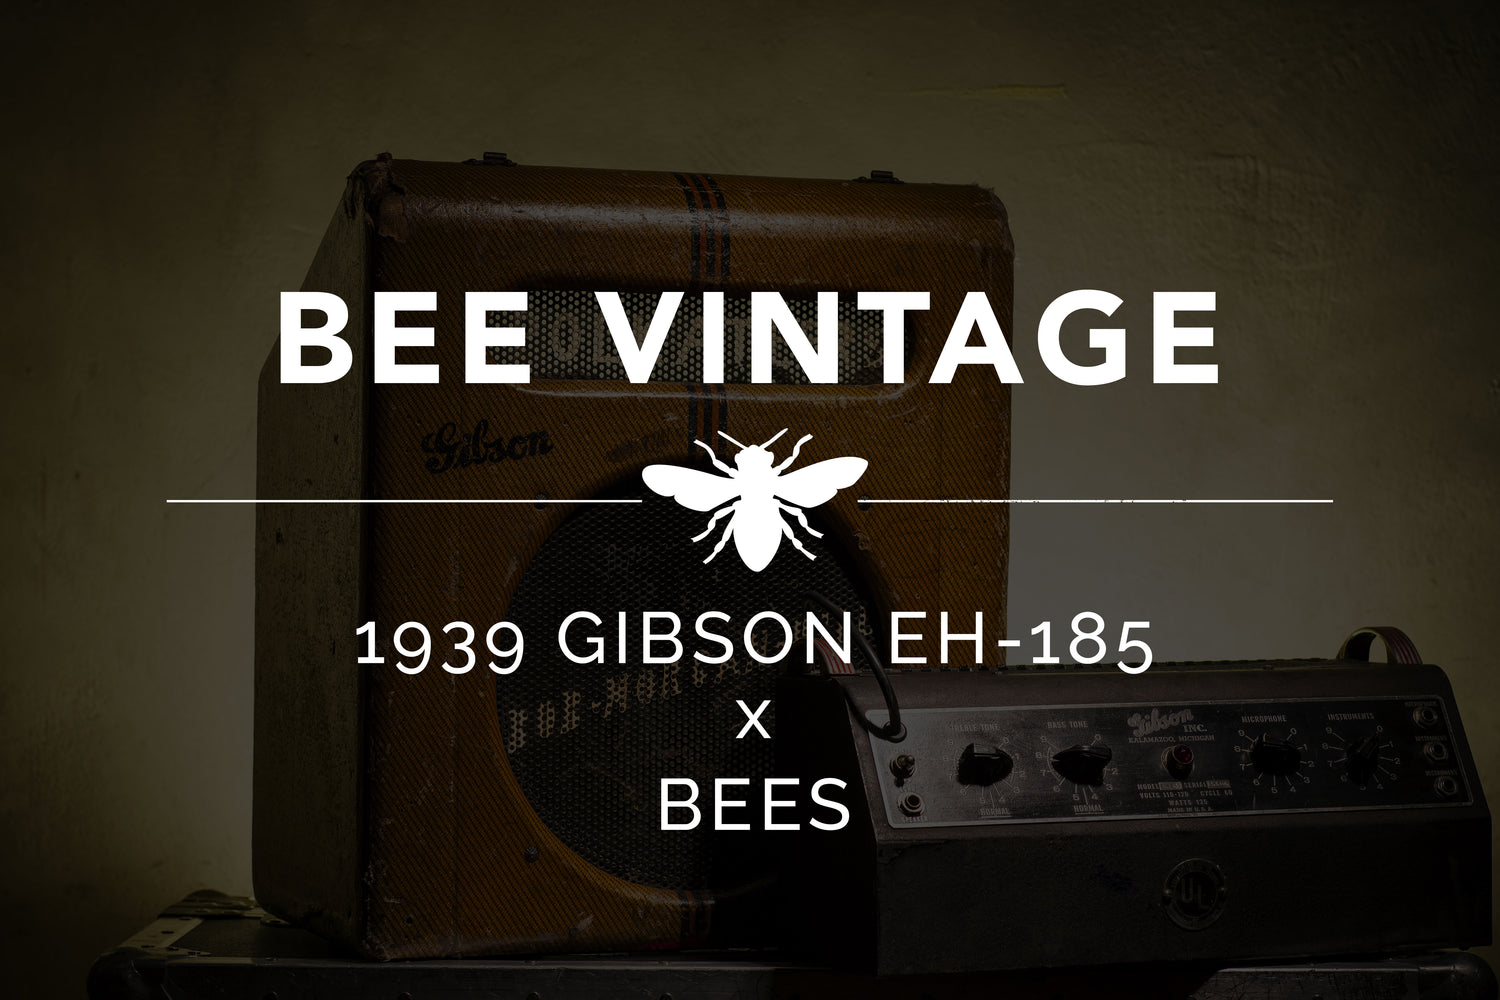 BEE VINTAGE - GIBSON EH185 X BEES